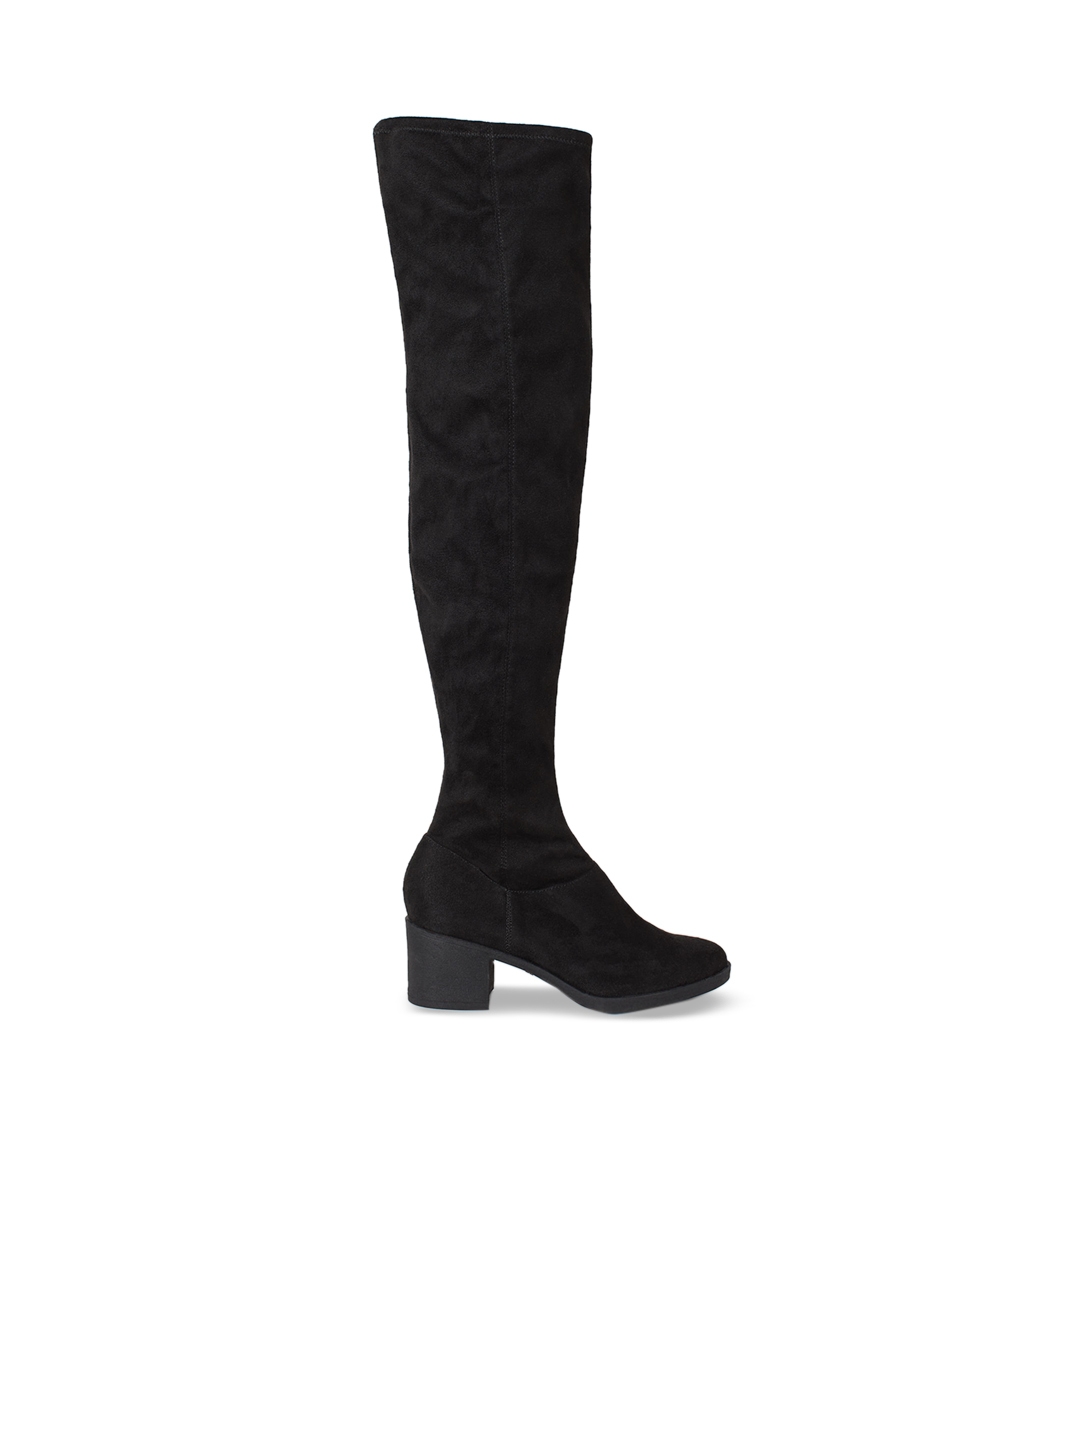 Womens Shoes Boots Knee-high boots NOTHING WRITTEN Leather Boots in Black 